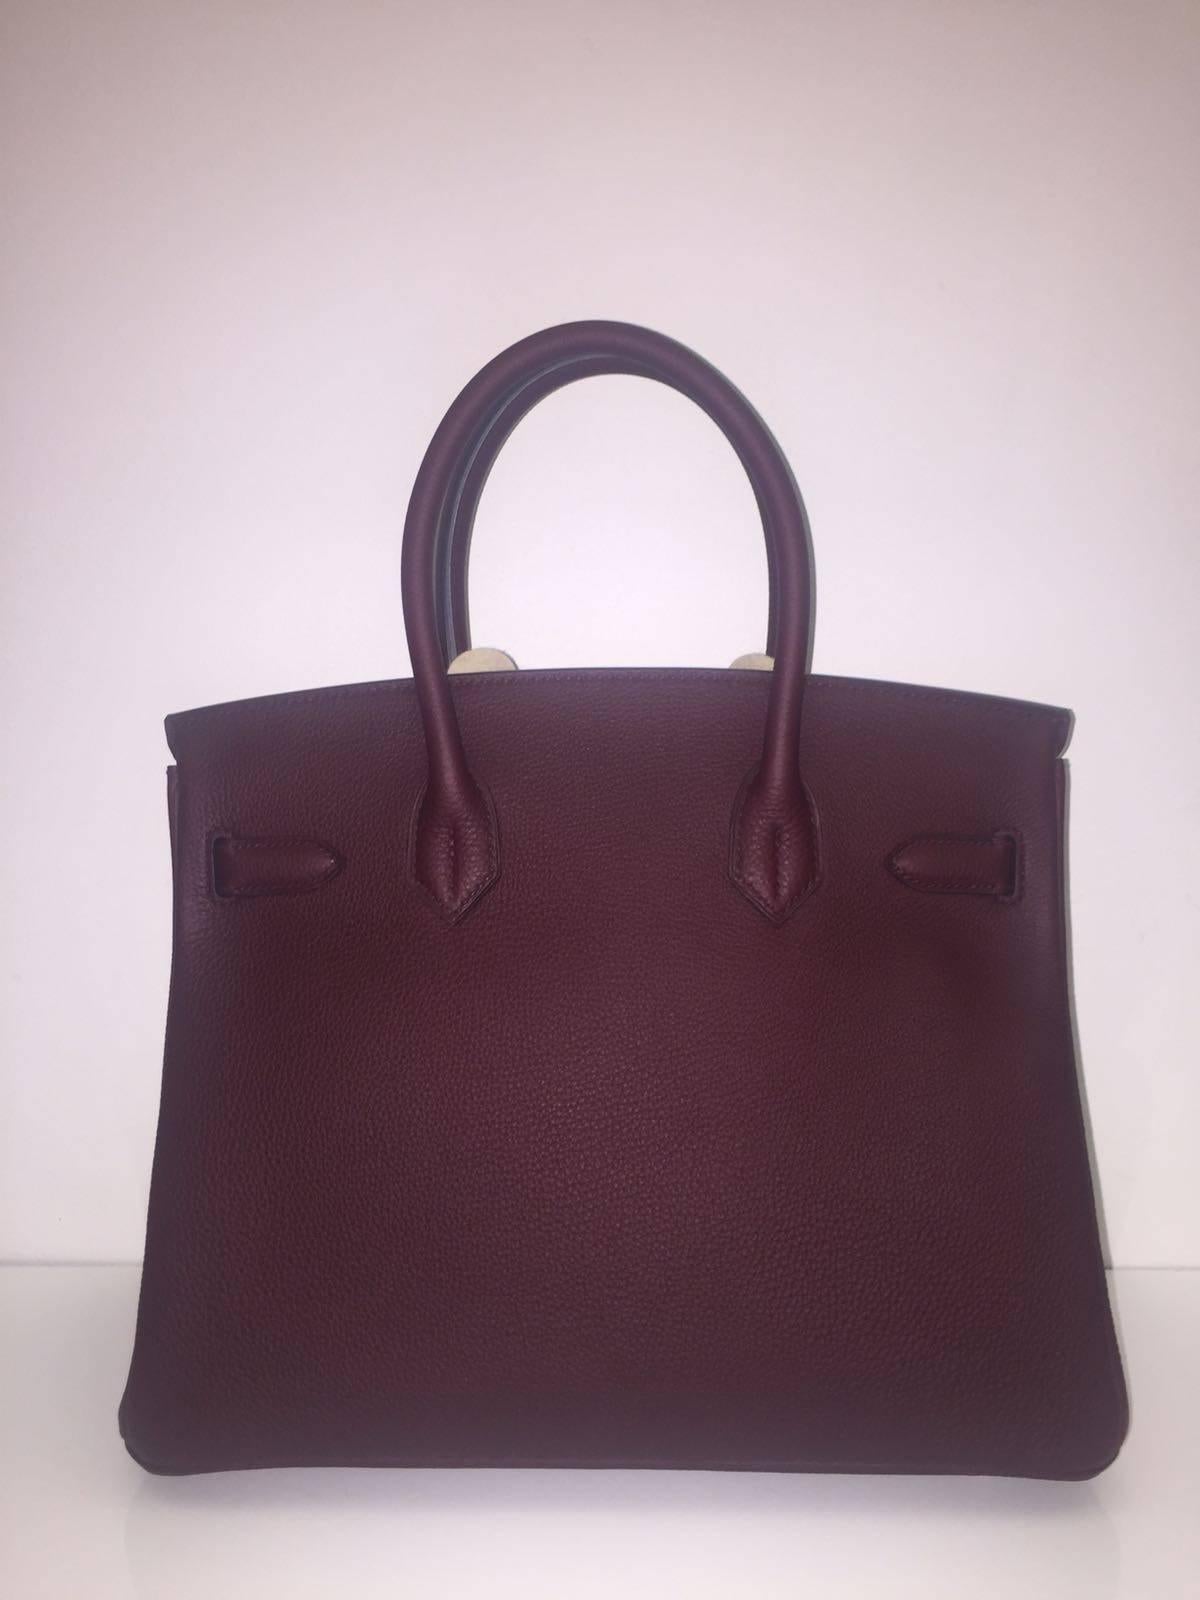 Hermes 
Birkin Size 30
Togo Leather 
Colour Bordeaux
Gold Hardware
store fresh, comes with receipt and full set (dust bag, box...) 
Hydeparkfashion specializes in sourcing and delivering authentic luxury handbags, mainly Hermes, to client around the